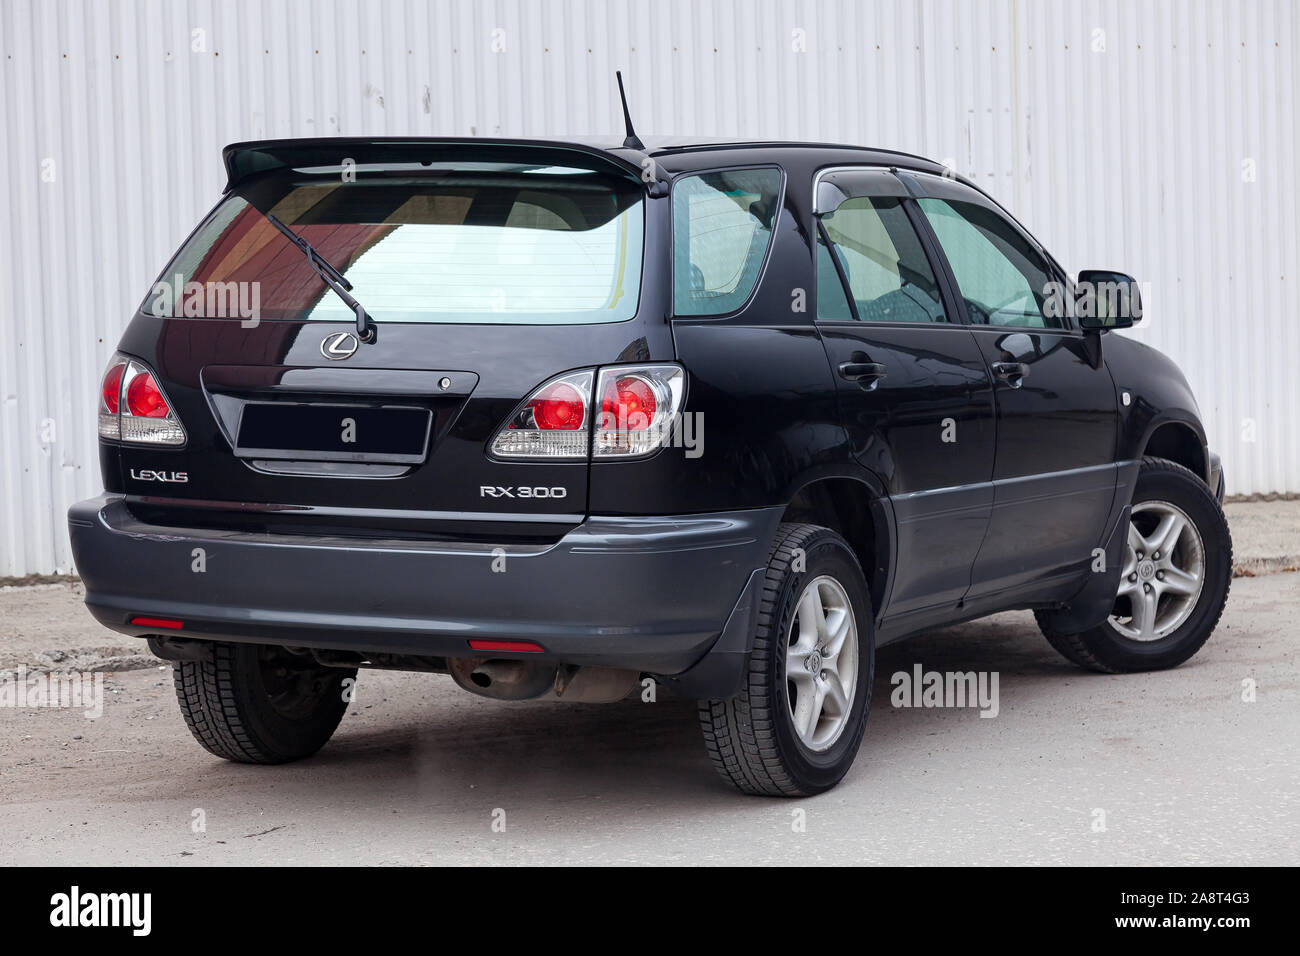 Novosibirsk, Russia - 11.05.2019: Black Toyota Harrier or Lexus RX300 1997 year rear view with gray interior in excellent condition in a parking space Stock Photo